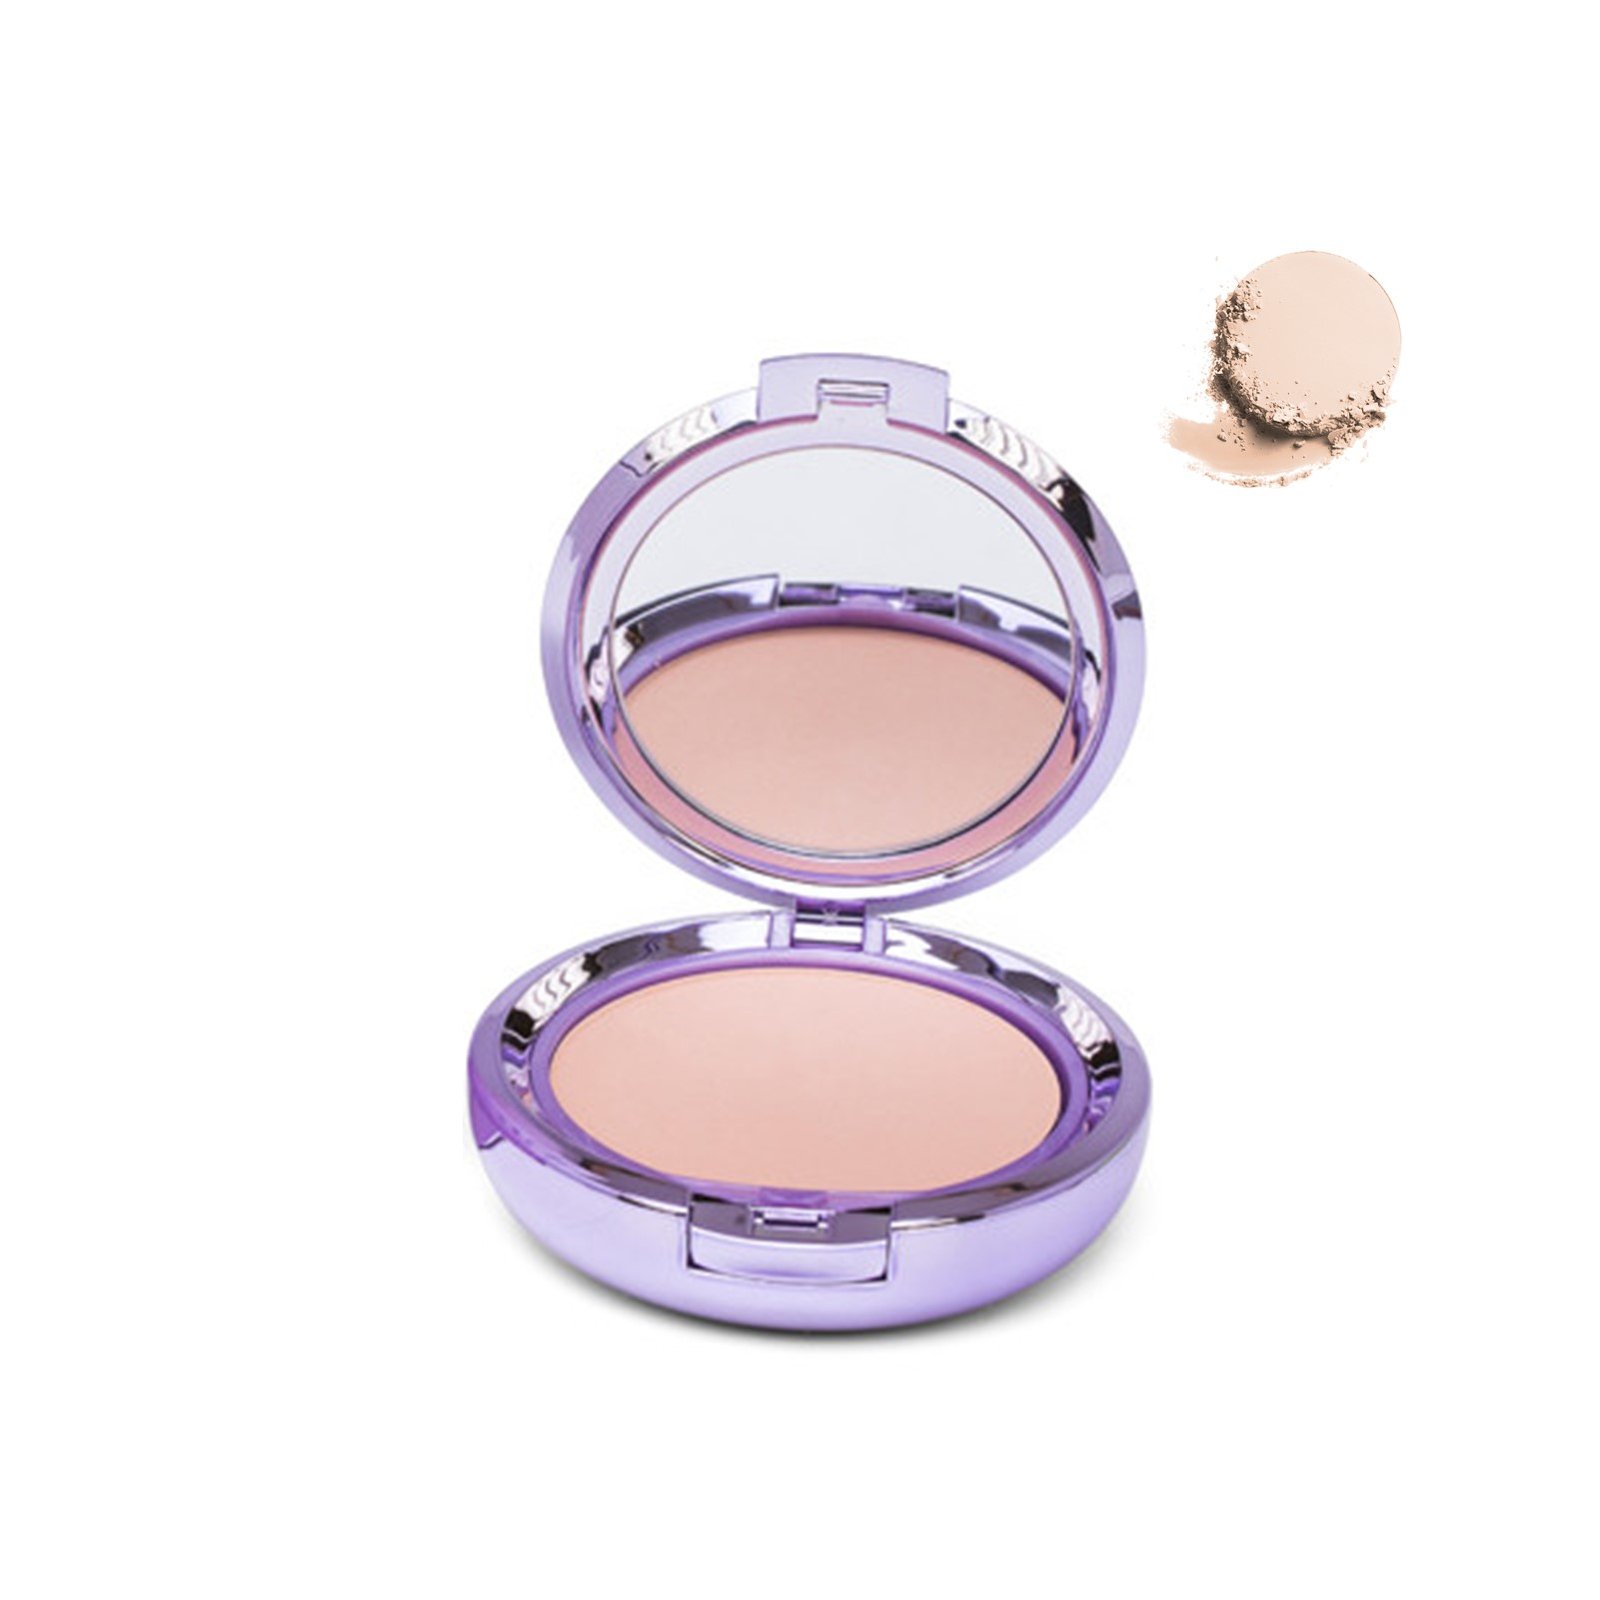 Covermark Compact Powder Normal Skin